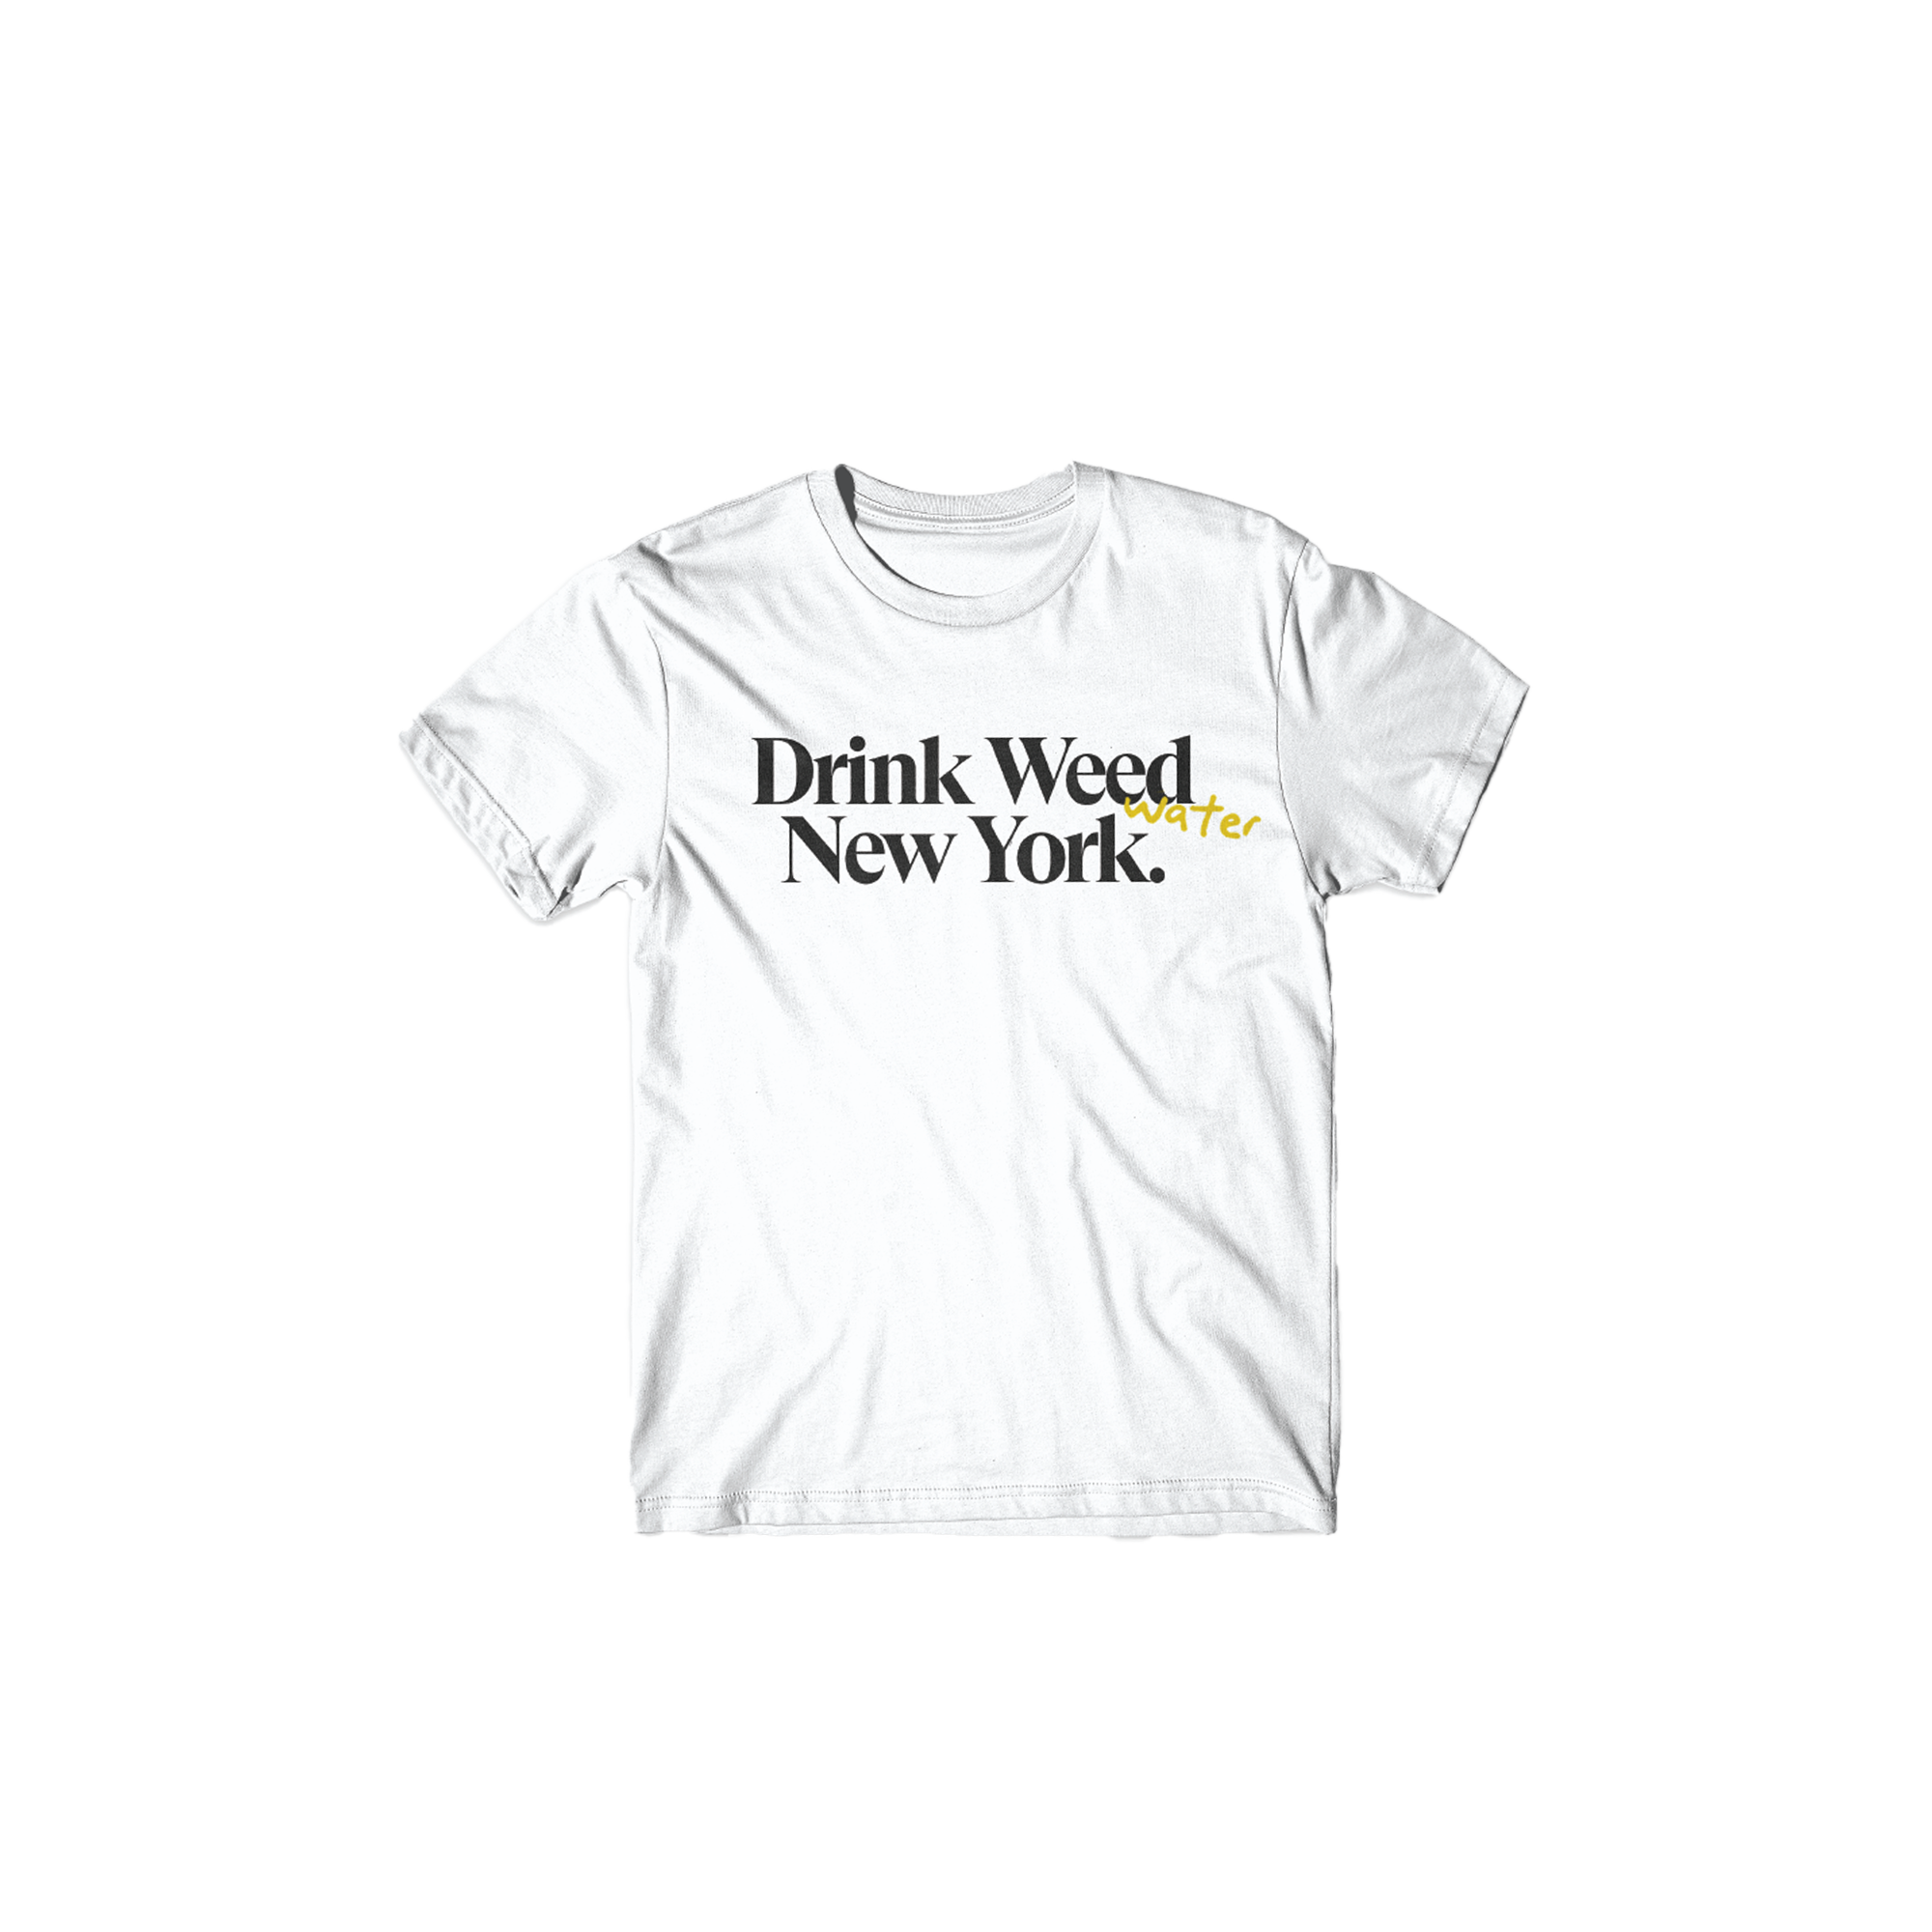 Drink Weed New York Shirt